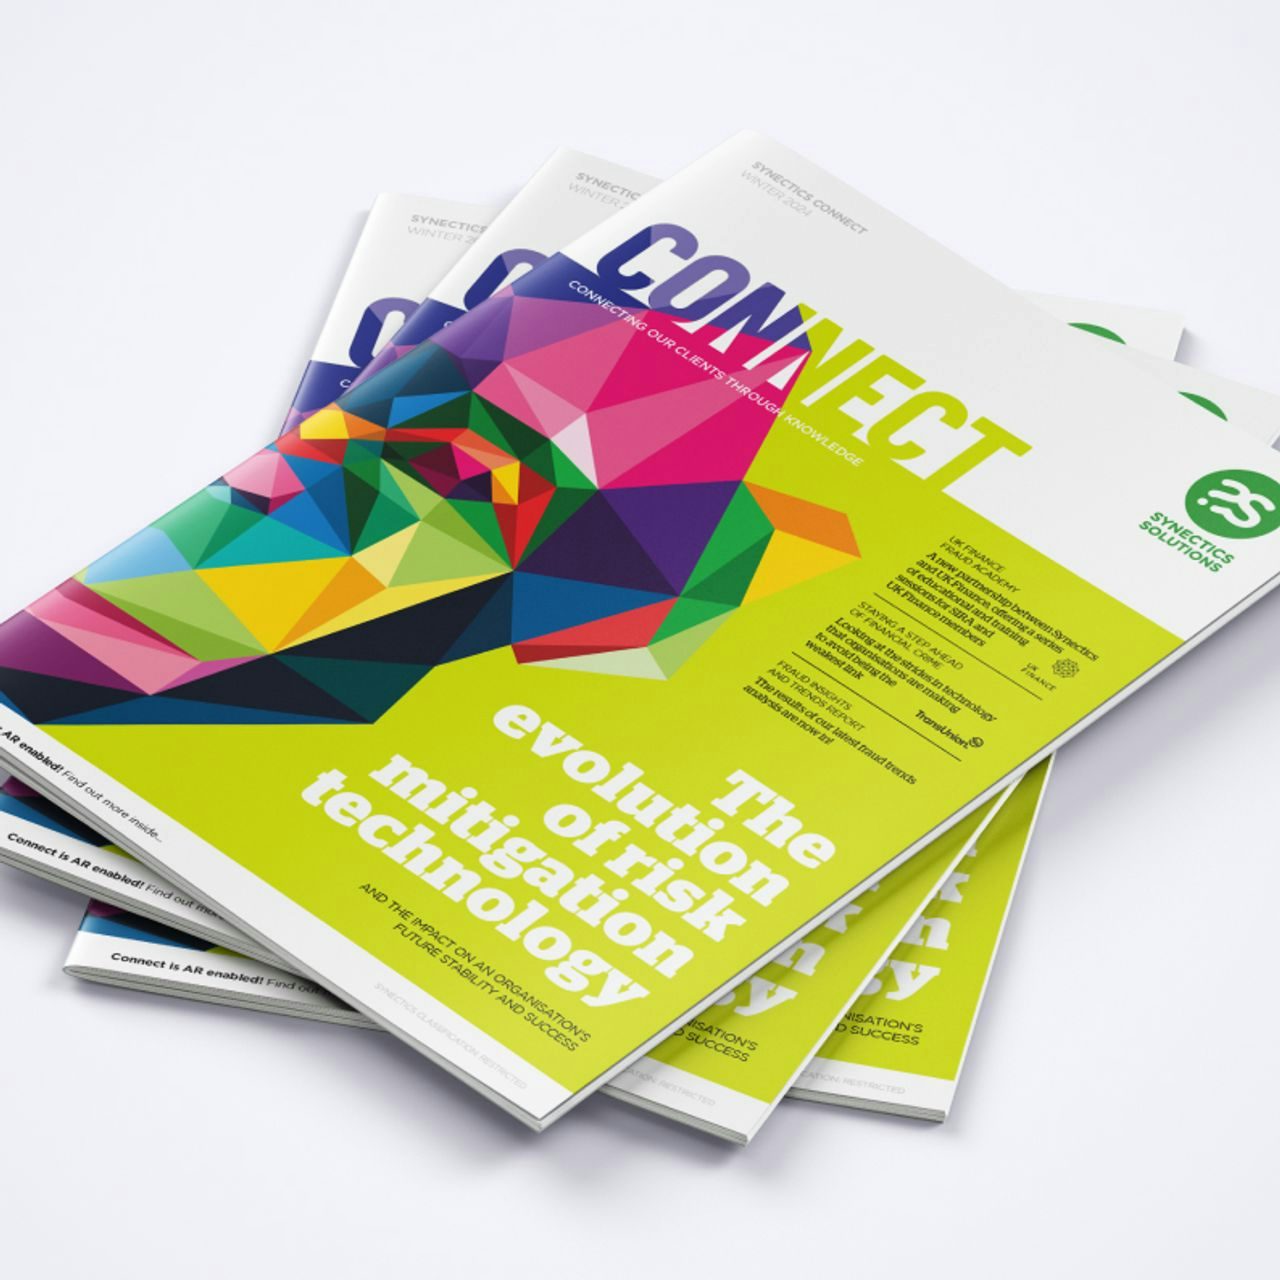 Cover of 'CONNECT' magazine with a focus on the evolution of risk mitigation technology, featuring a bold graphic of half of a geometric monkey face on a green background.